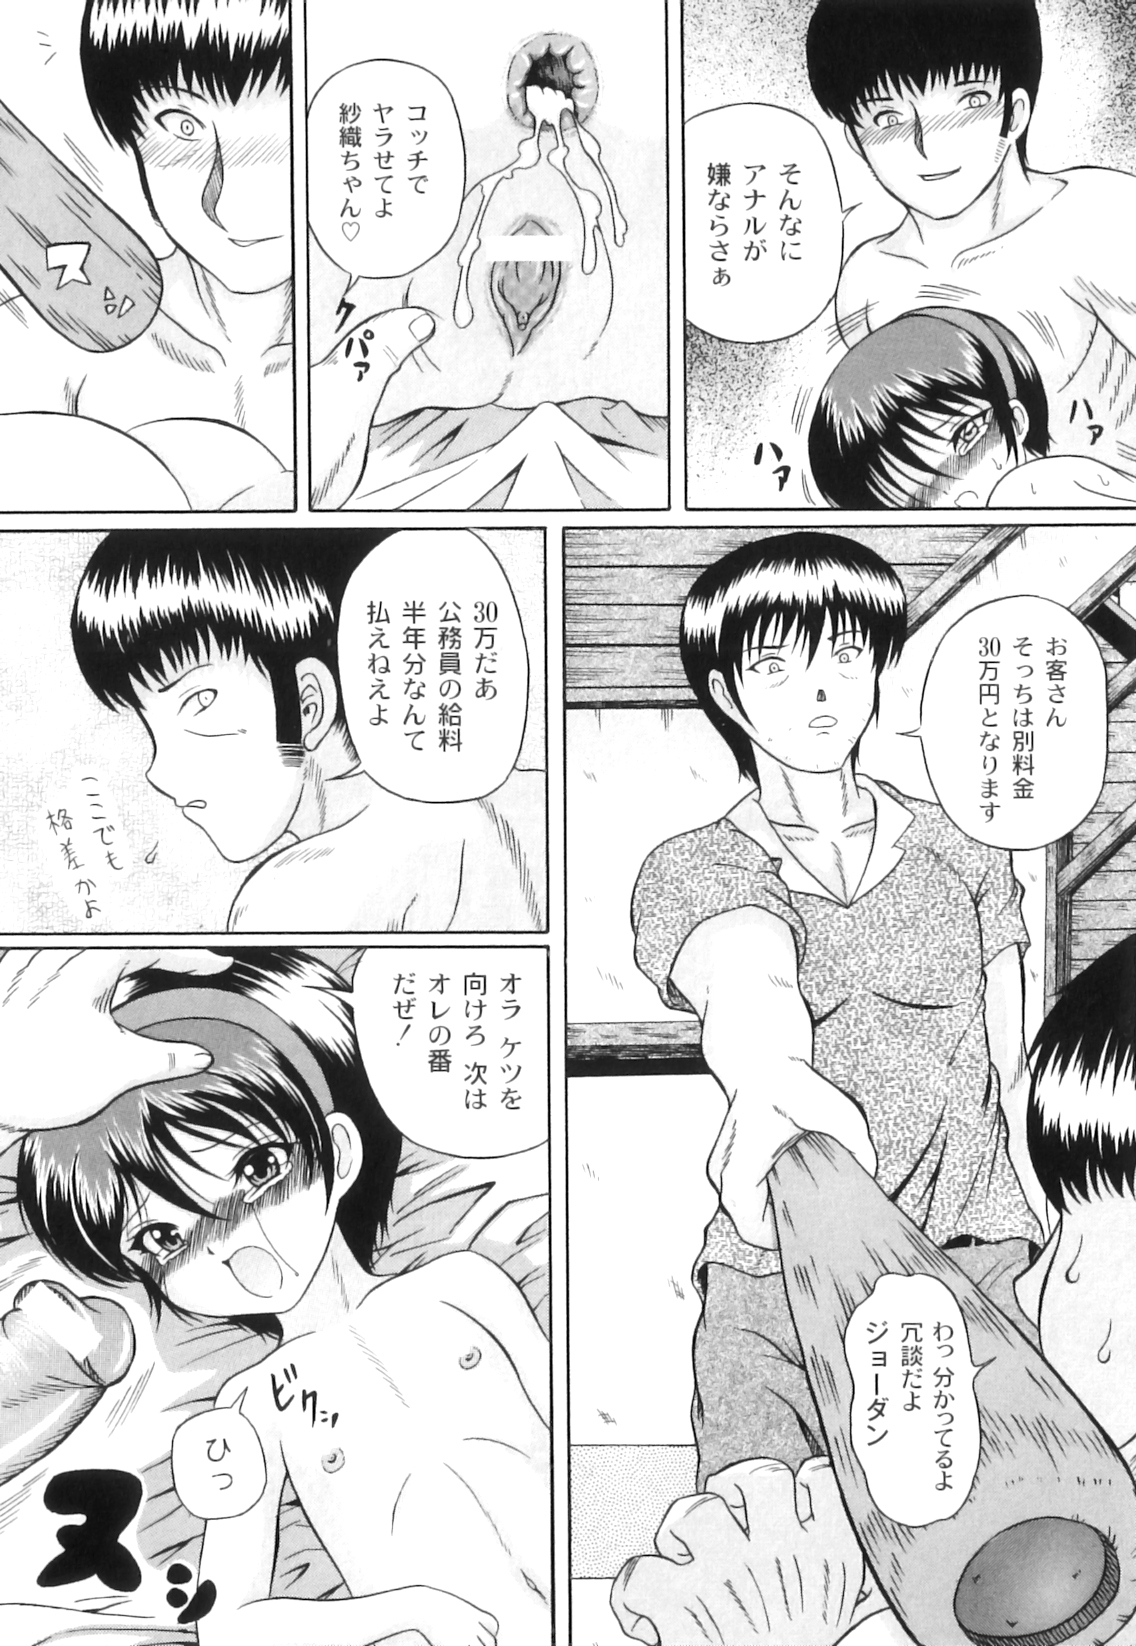 Anthology - PLUM LS 03 [2011-01-28] (Book) (HQ) page 41 full